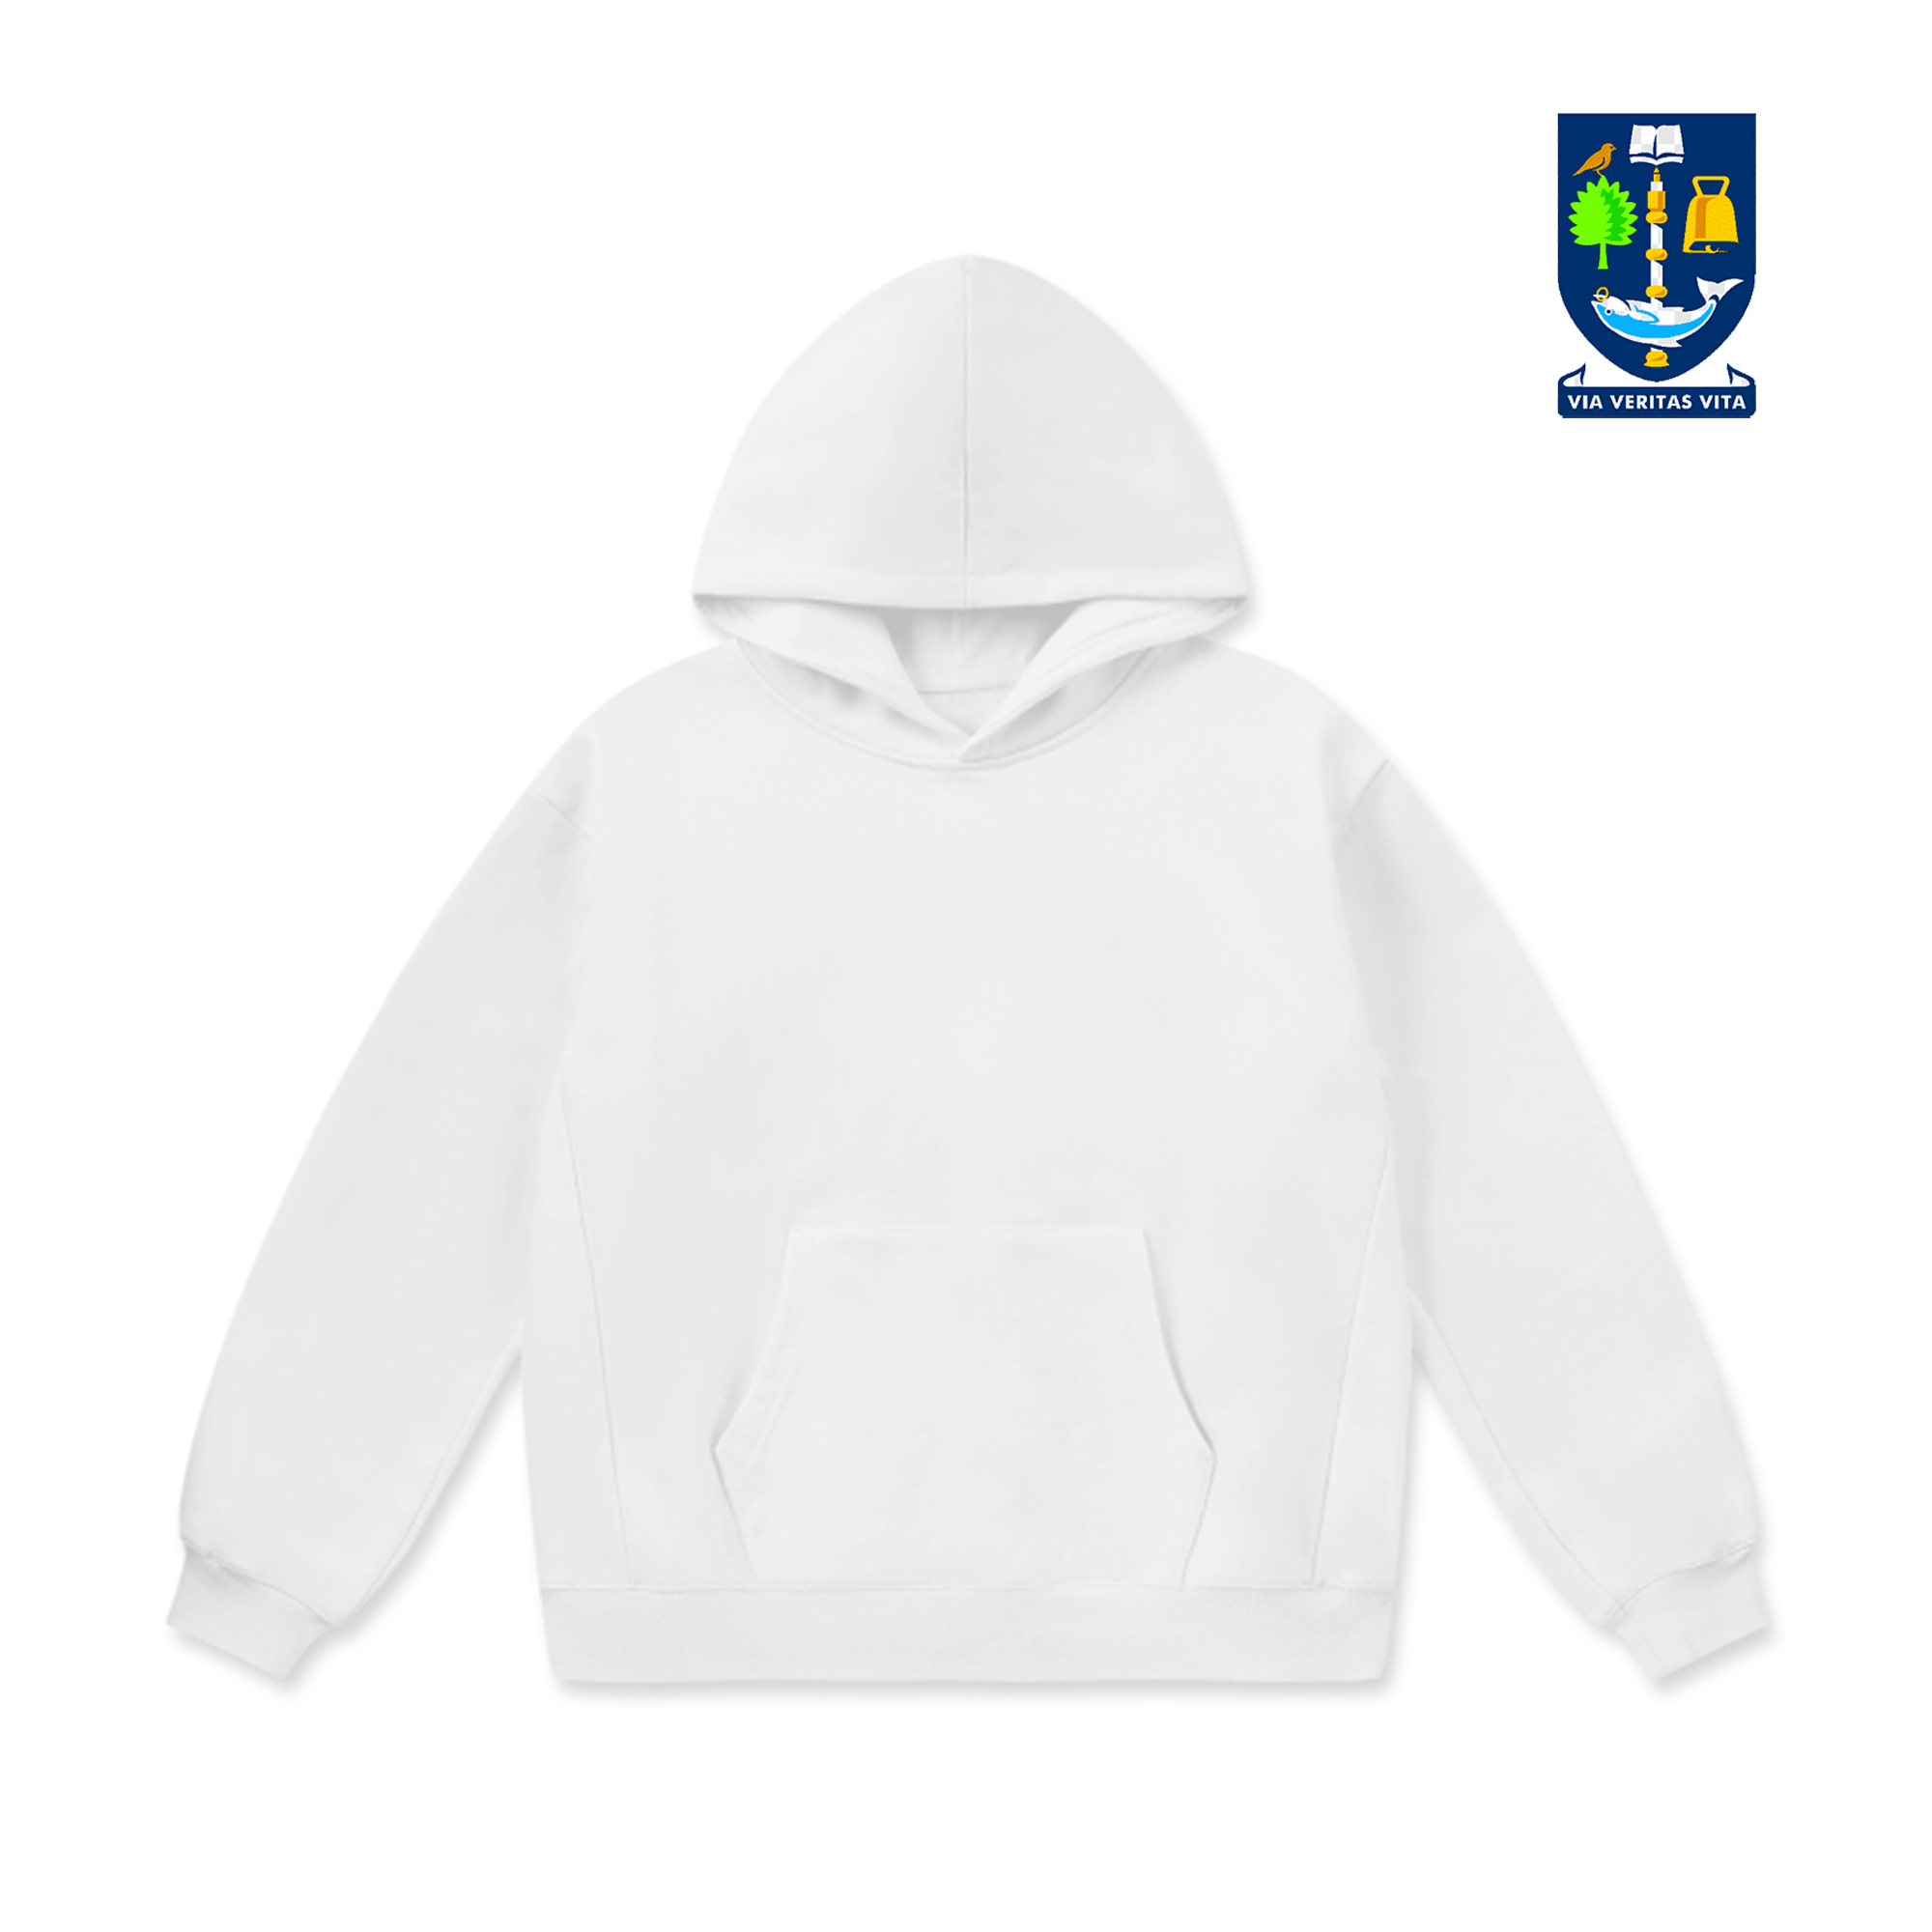 LCC Super Weighted Hoodie - University of Glasgow (Classic)